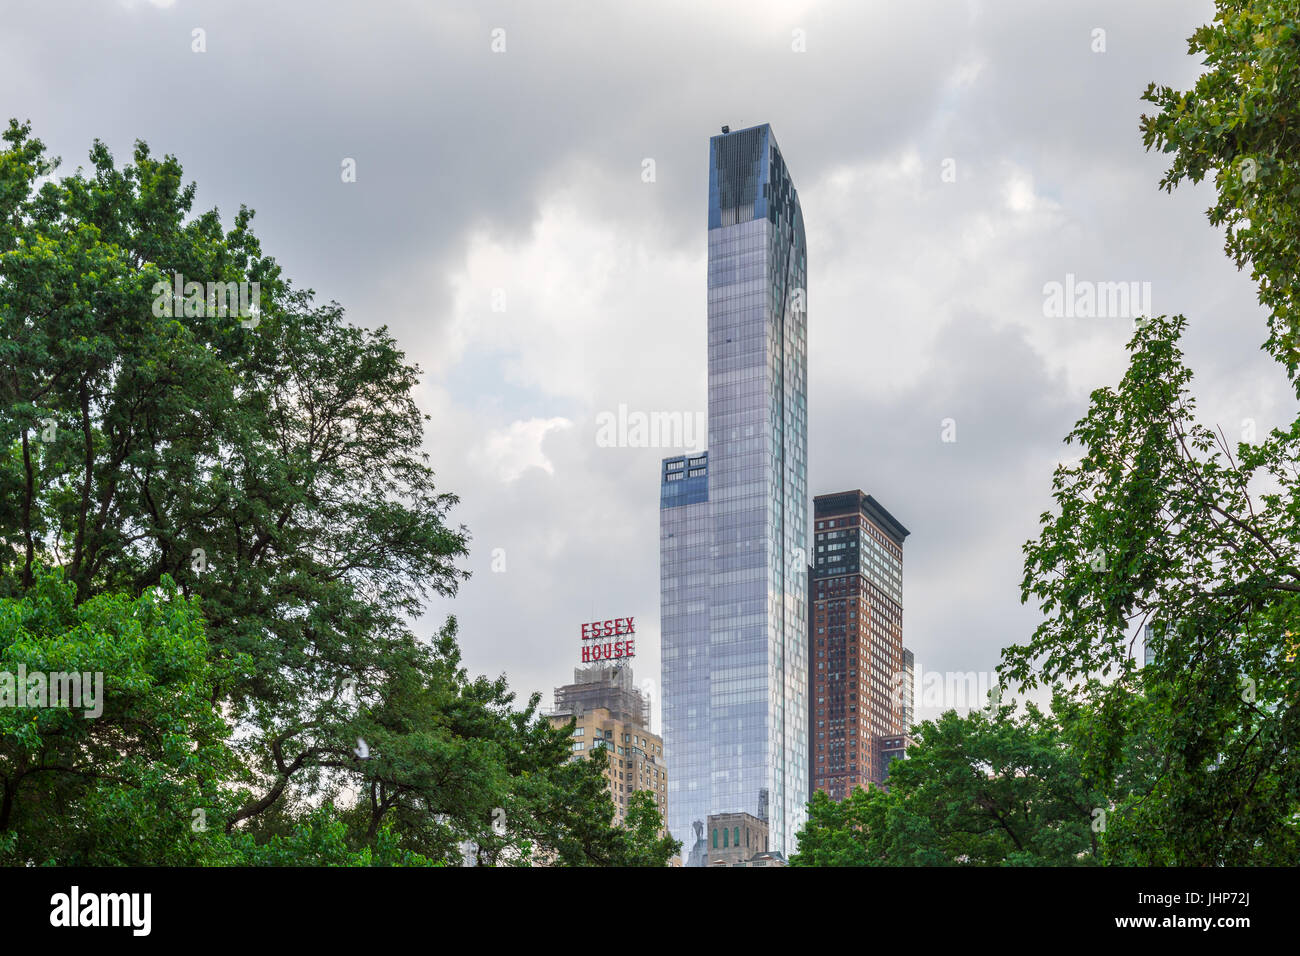 view of buildings on central park south from sheeps meadow in central park, NYC Stock Photo